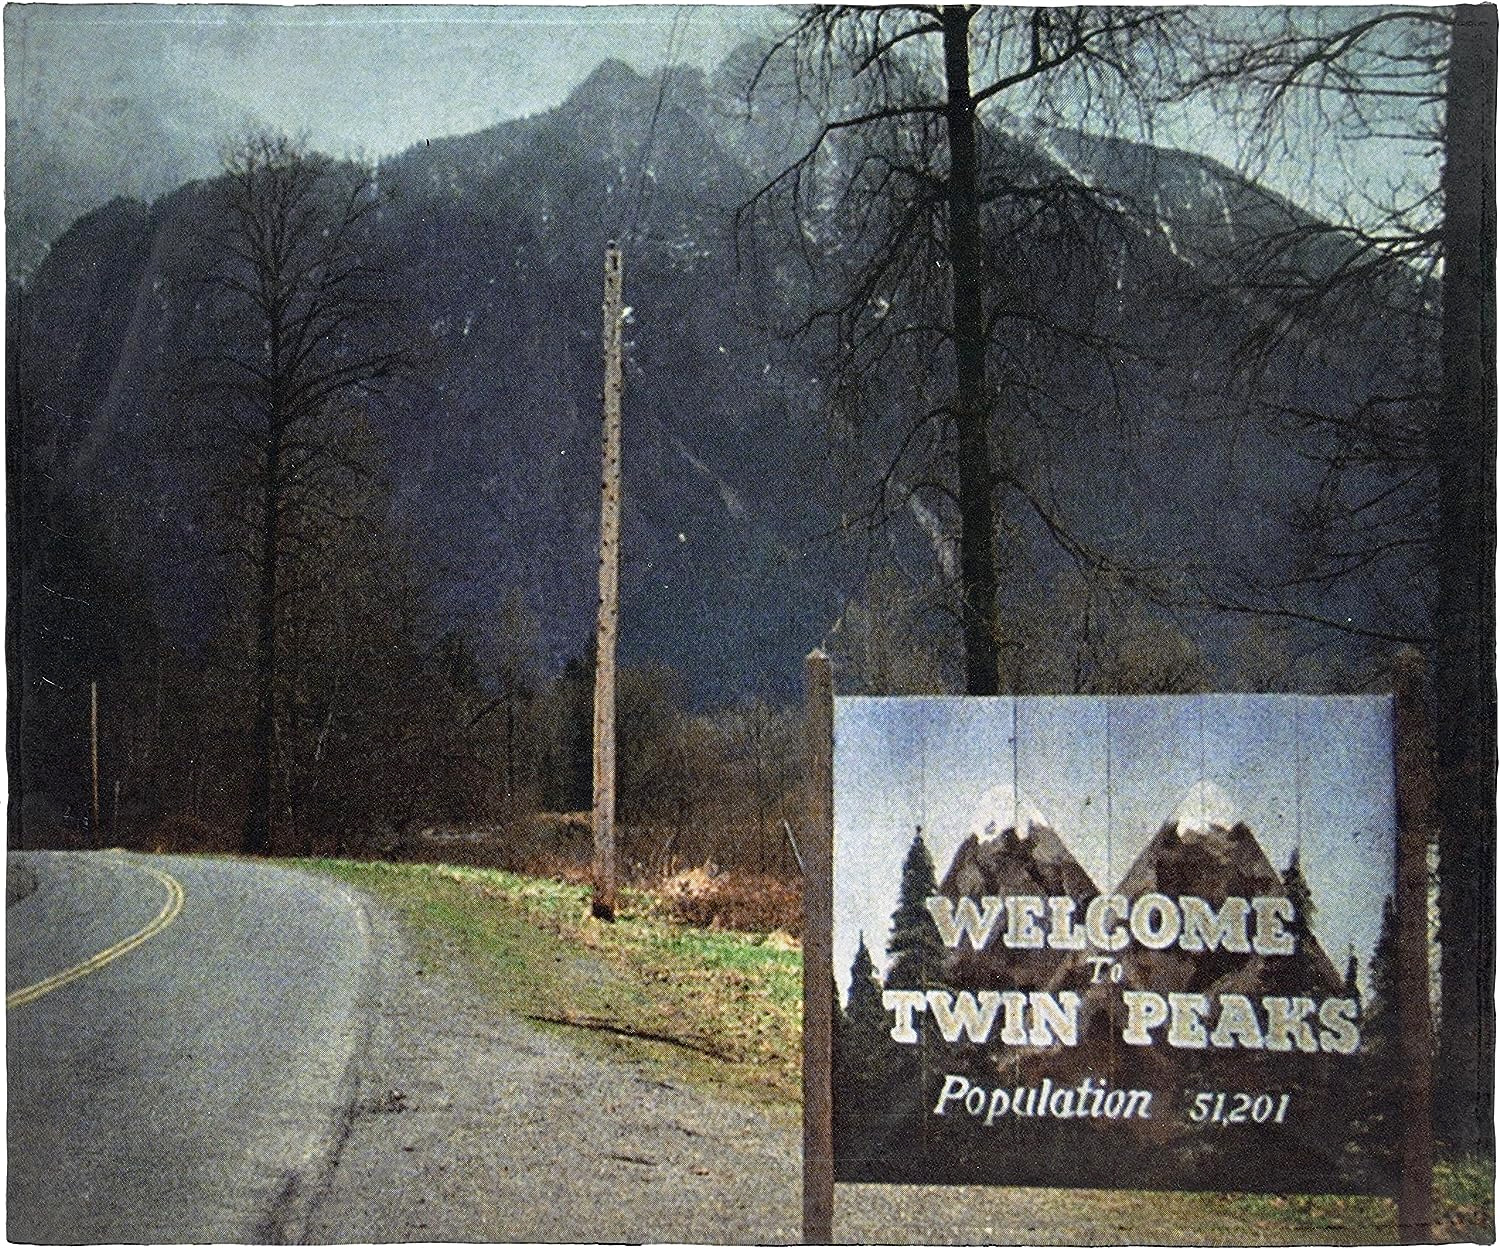 Lance Blanket Welcome to Twin Peaks Population 51,201